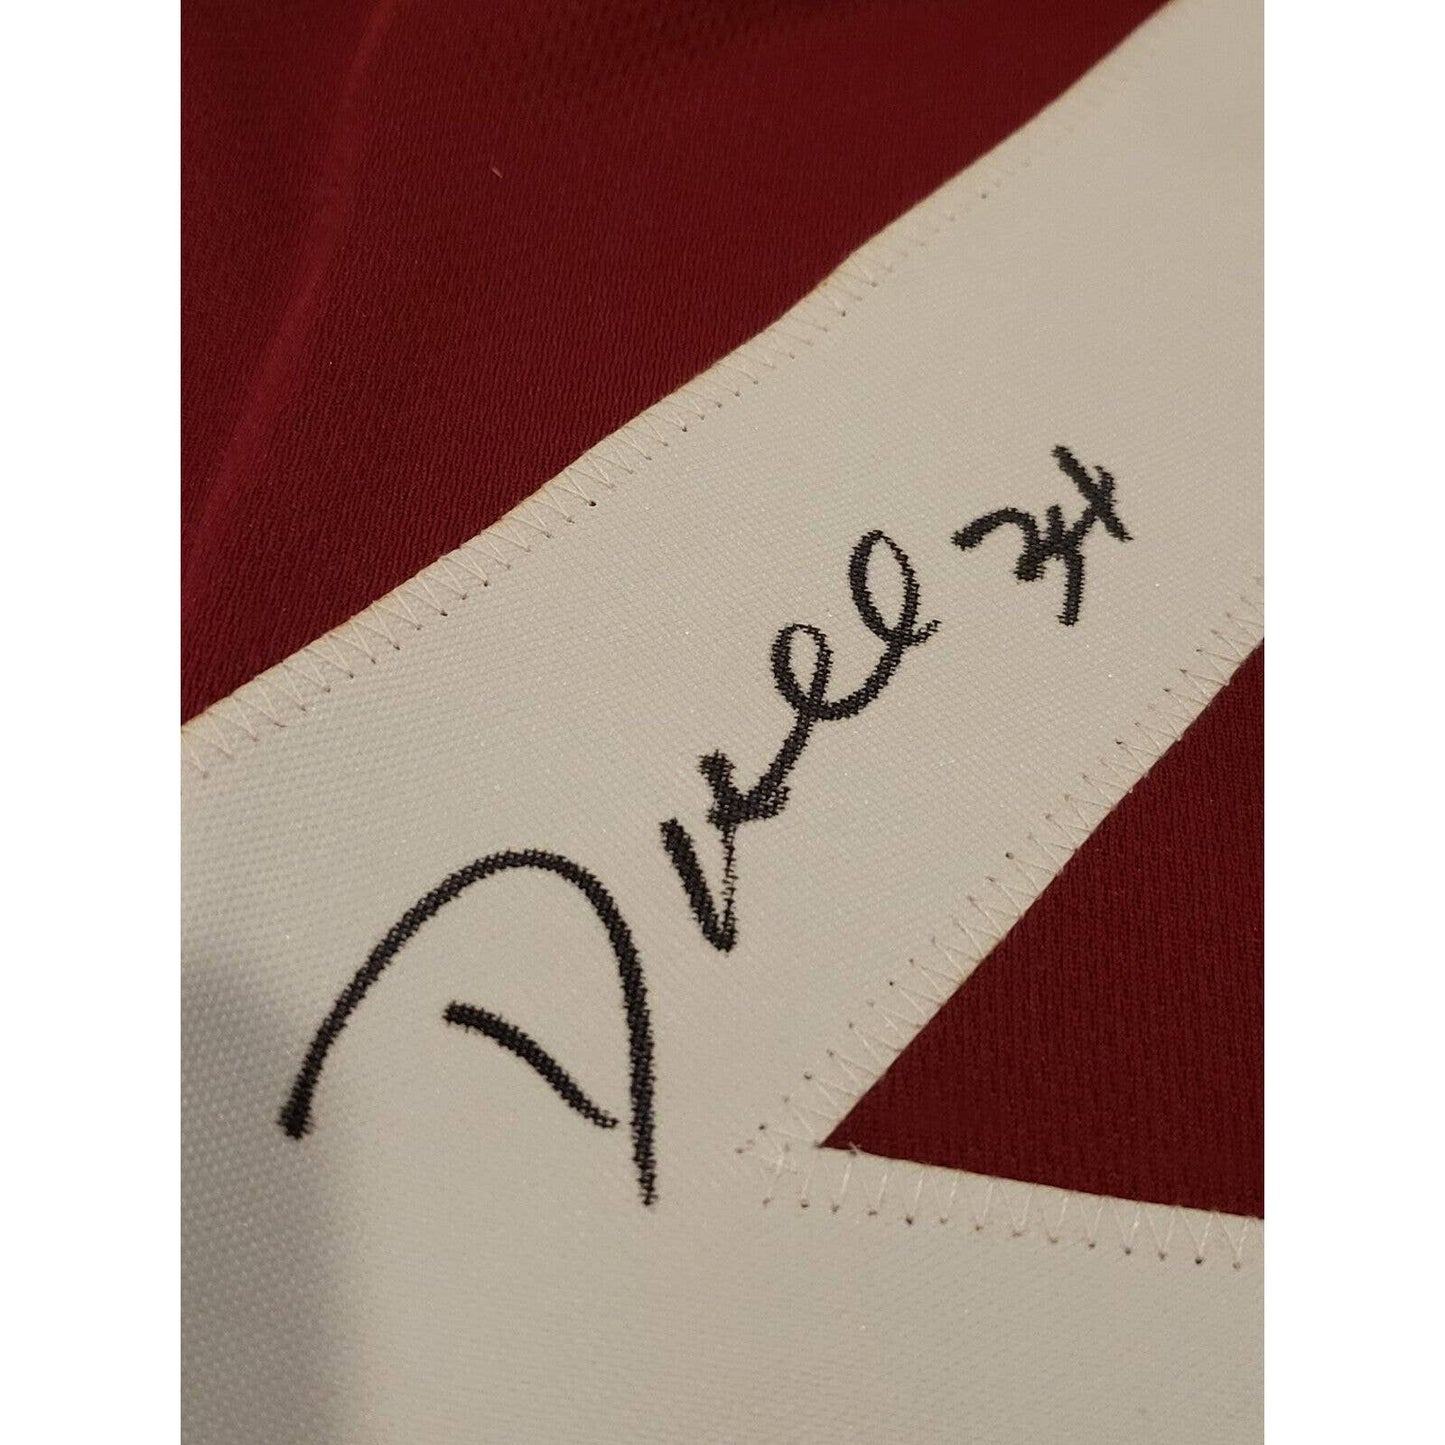 Dante Hall Autographed/Signed Jersey PSA/DNA COA Texas A&M Aggies Chiefs - TreasuresEvolved